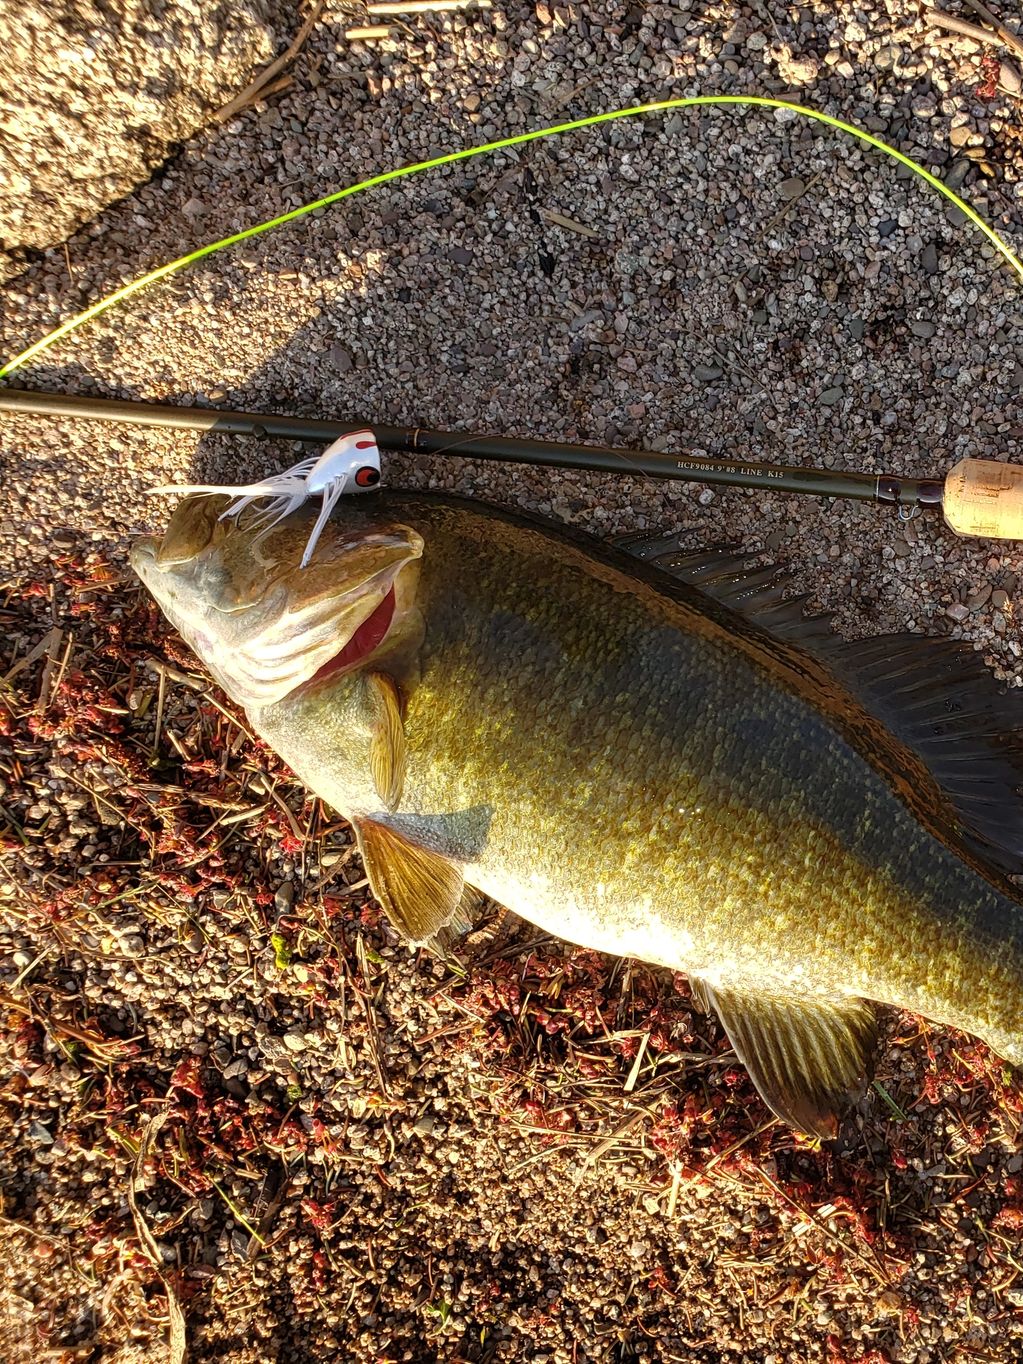 19 inch Smallmouth Bass caught on a large white popper fly.